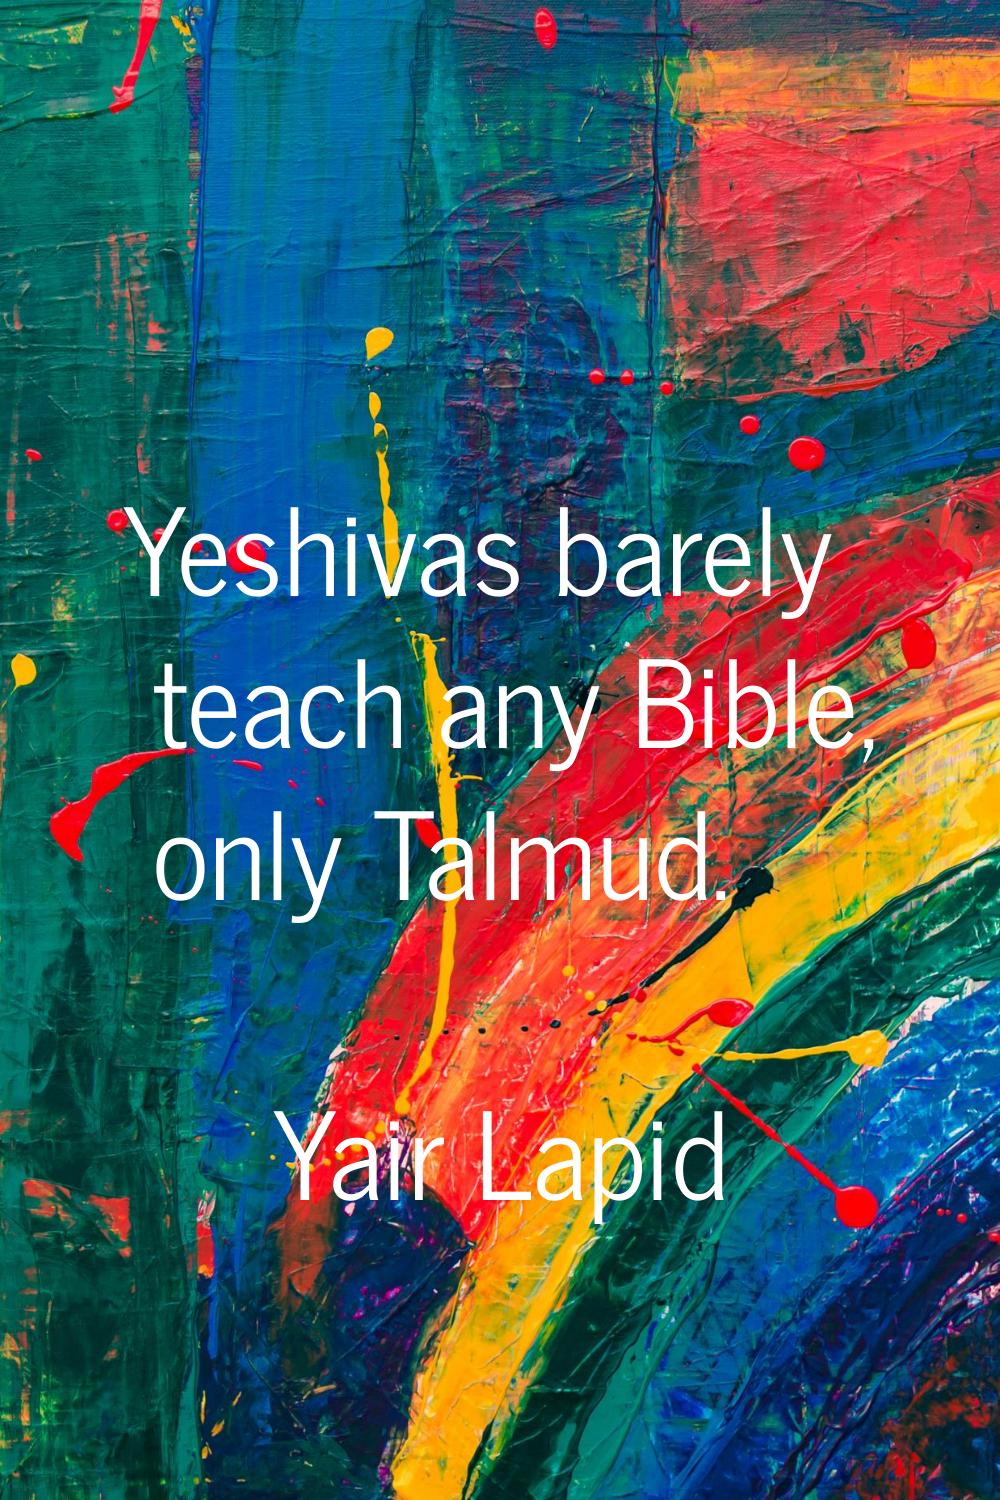 Yeshivas barely teach any Bible, only Talmud.